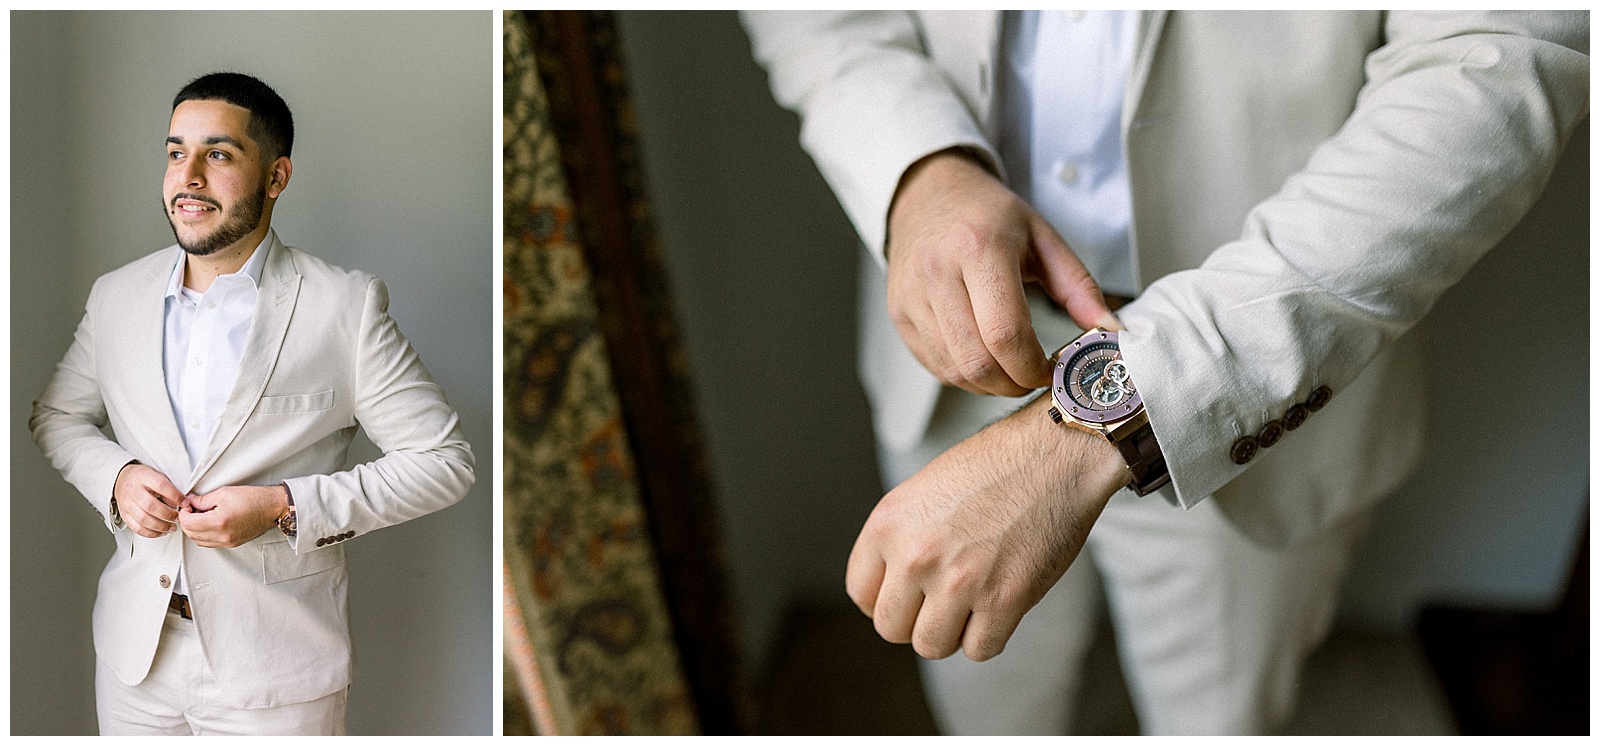 groom-to-be adjusts his watch and jacket cuffs just before his wedding ceremony, an intimate home wedding at the parents of his bride's house